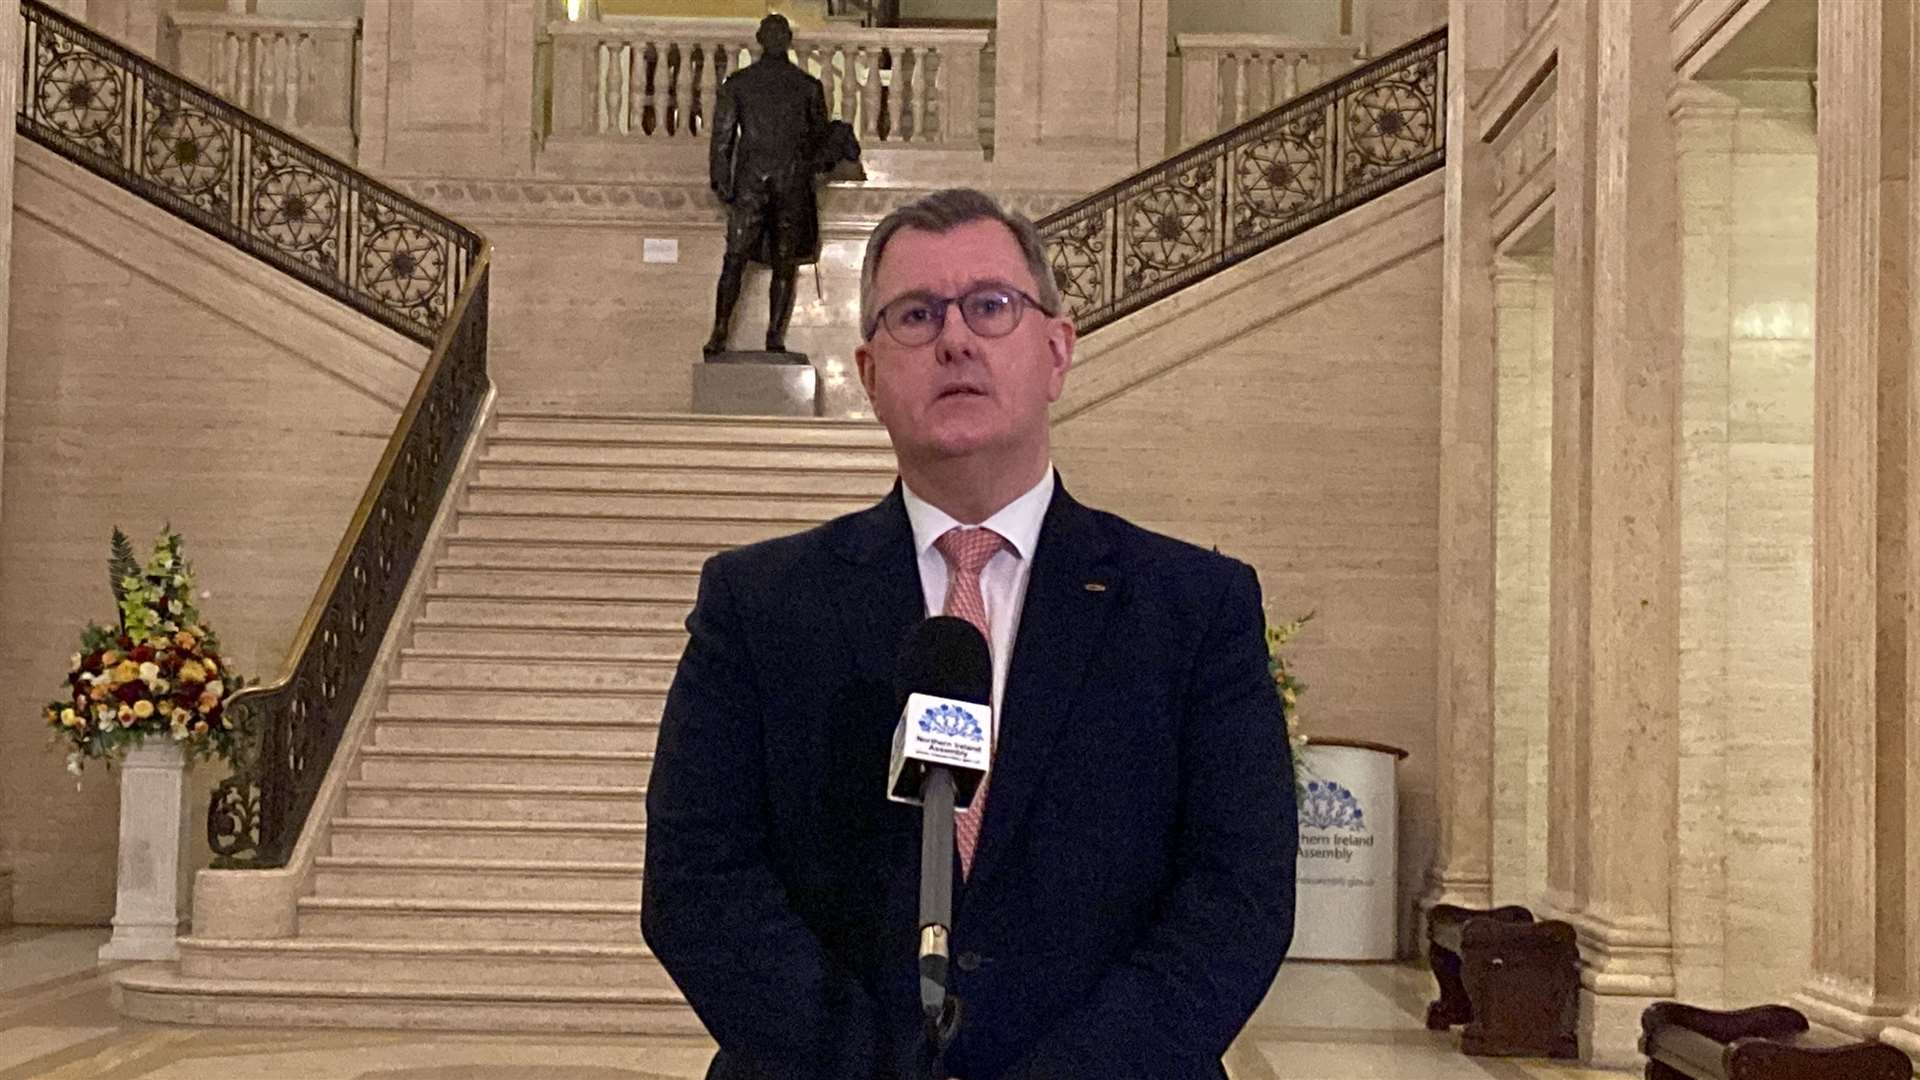 DUP leader Sir Jeffrey Donaldson speaks to media in the Great Hall at Stormont following the shooting of an off-duty police officer in Co Tyrone (Rebecca Black/PA)